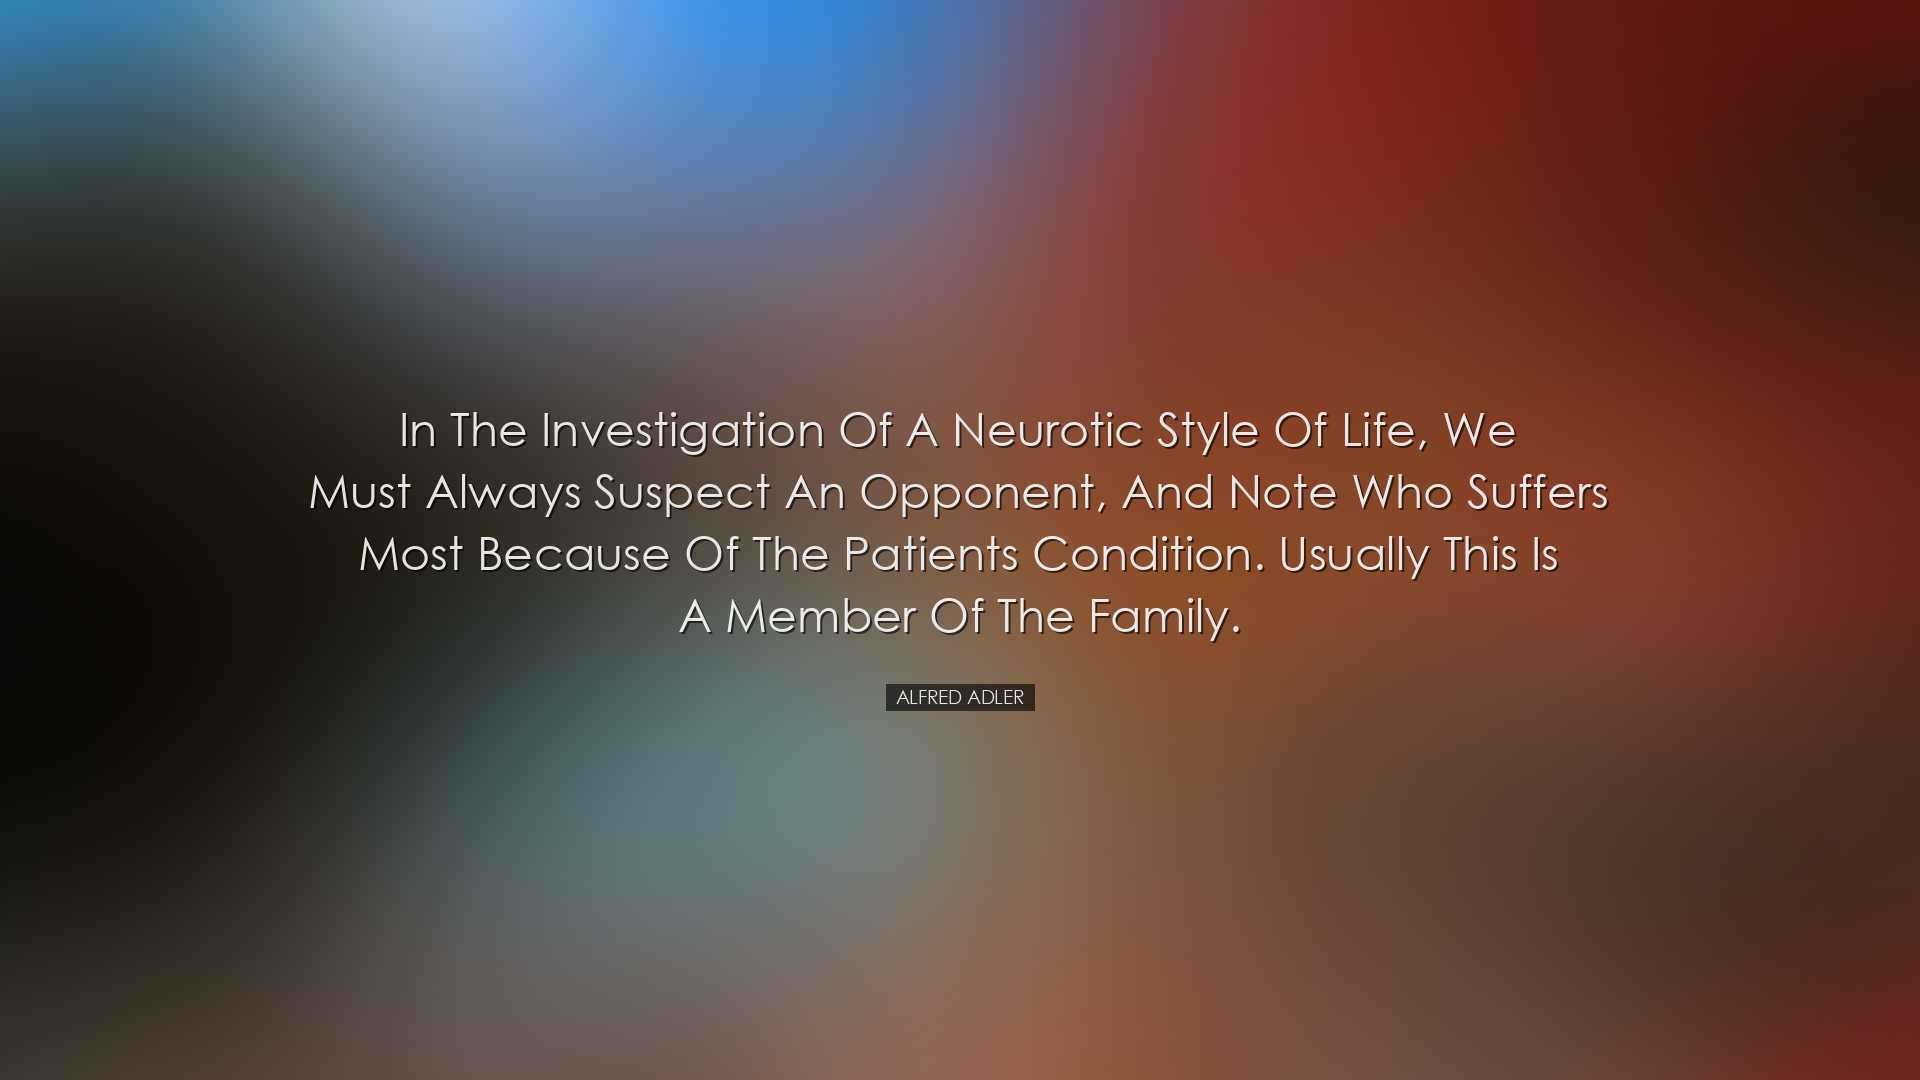 In the investigation of a neurotic style of life, we must always s